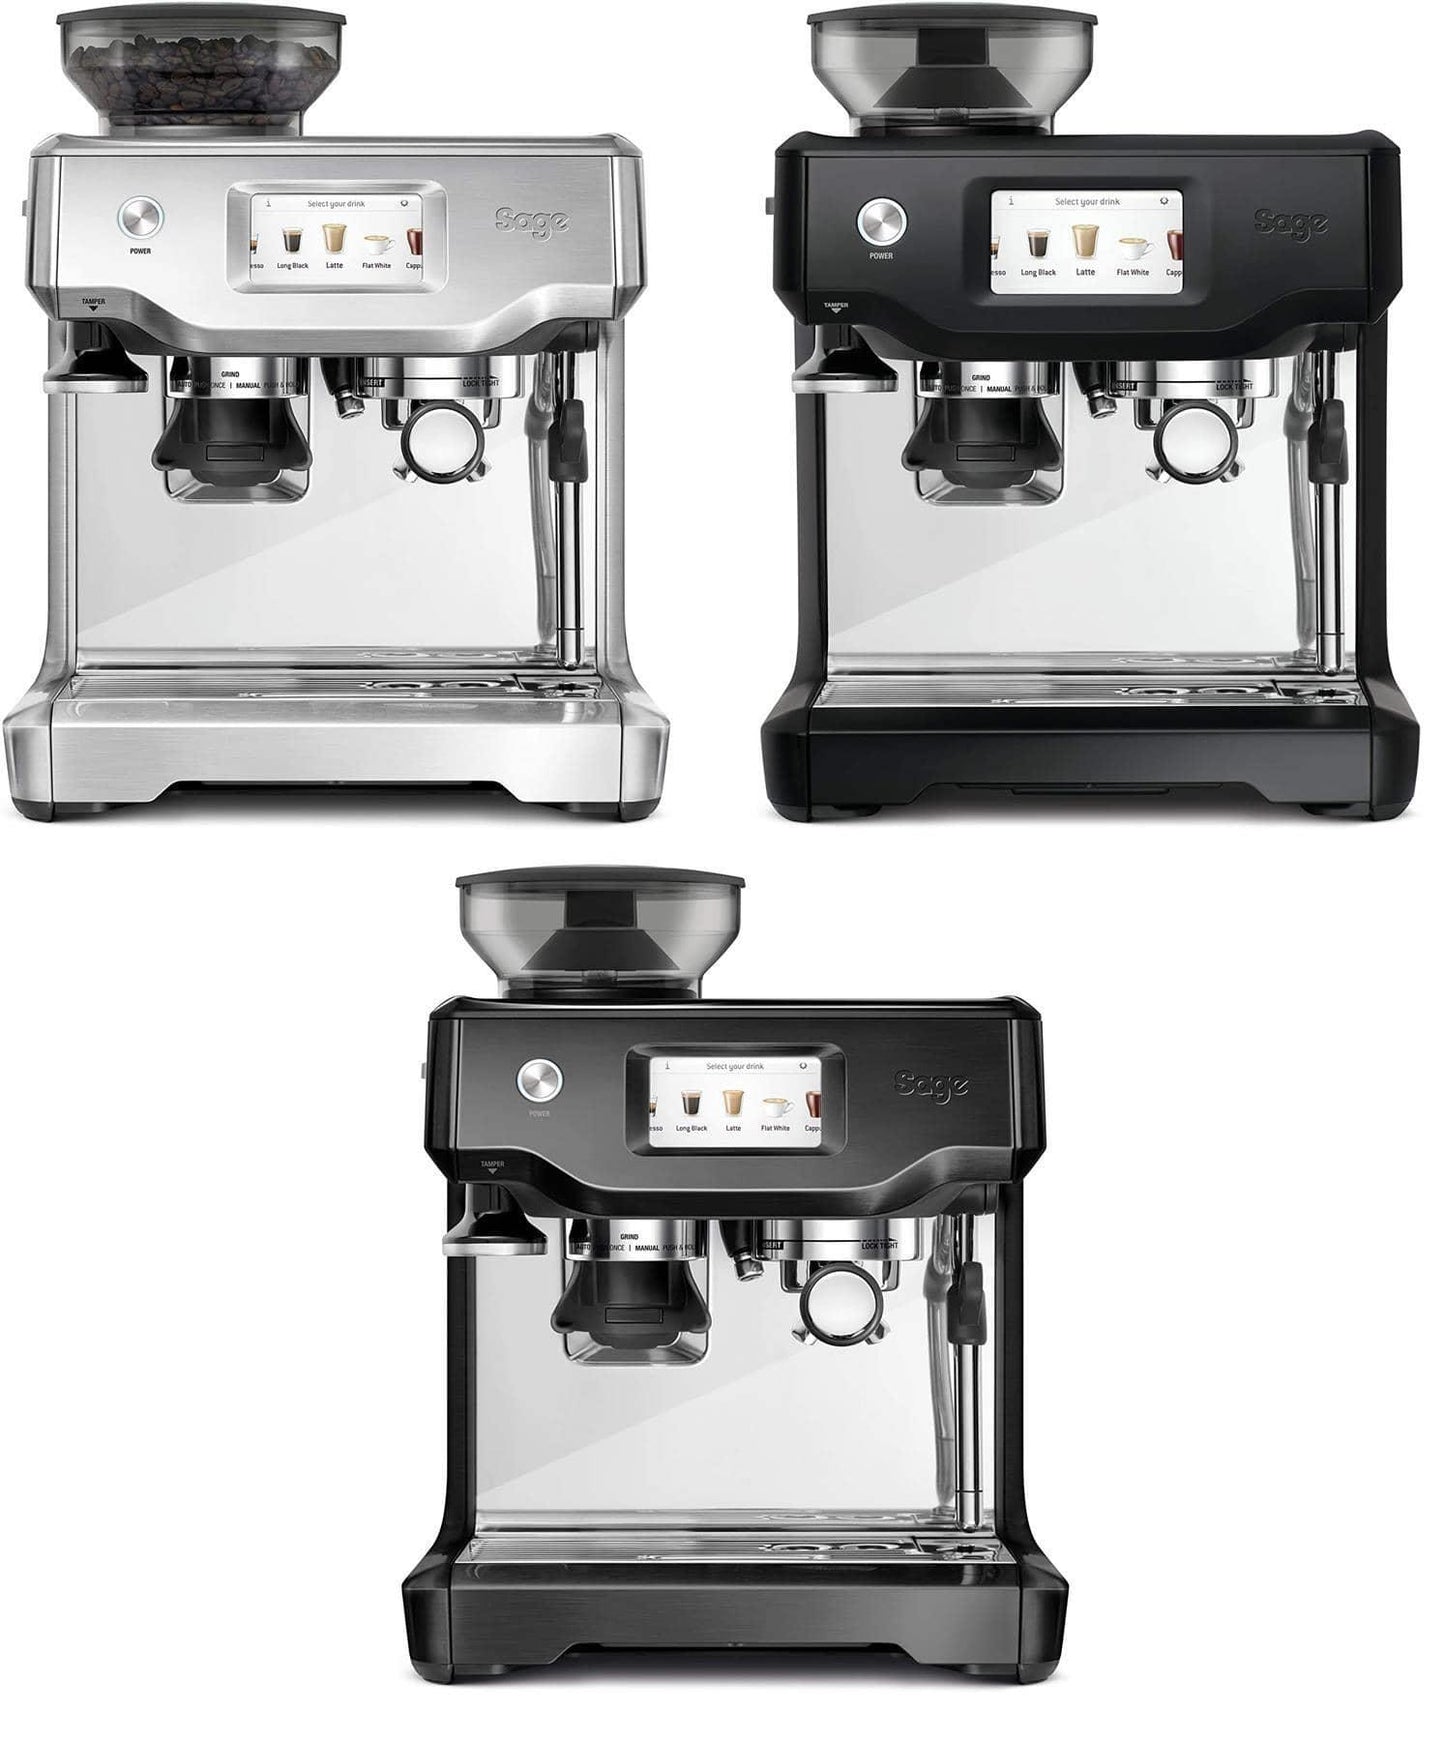 Sage The Barista Touch SES880 Coffee Machine Silver/Black